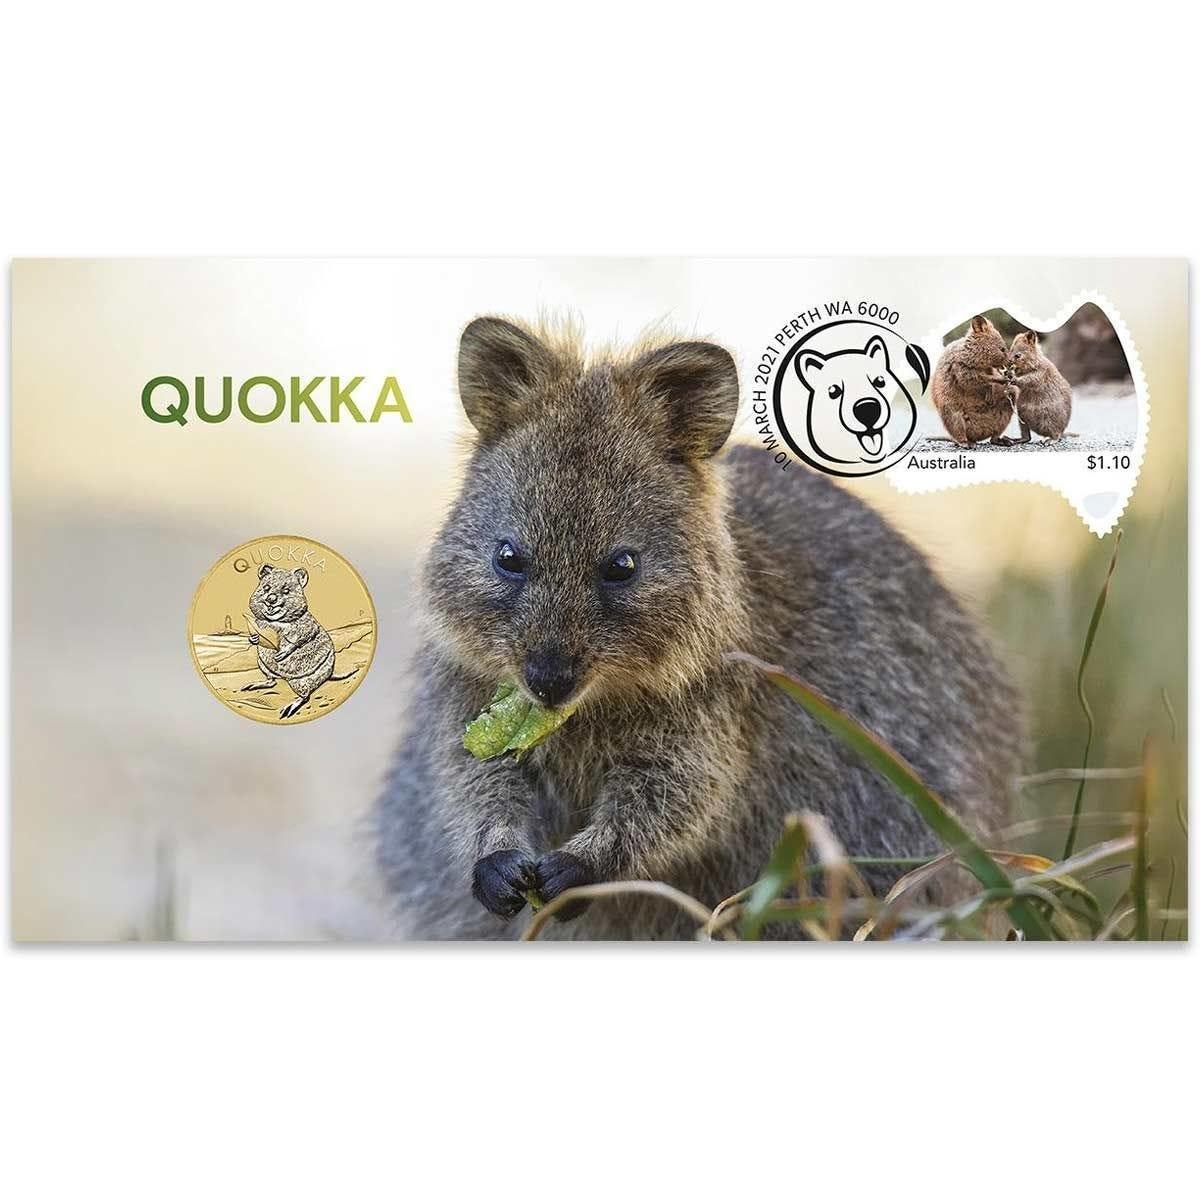 2021 $1 Australian Quokka Stamp & Coin Cover PNC